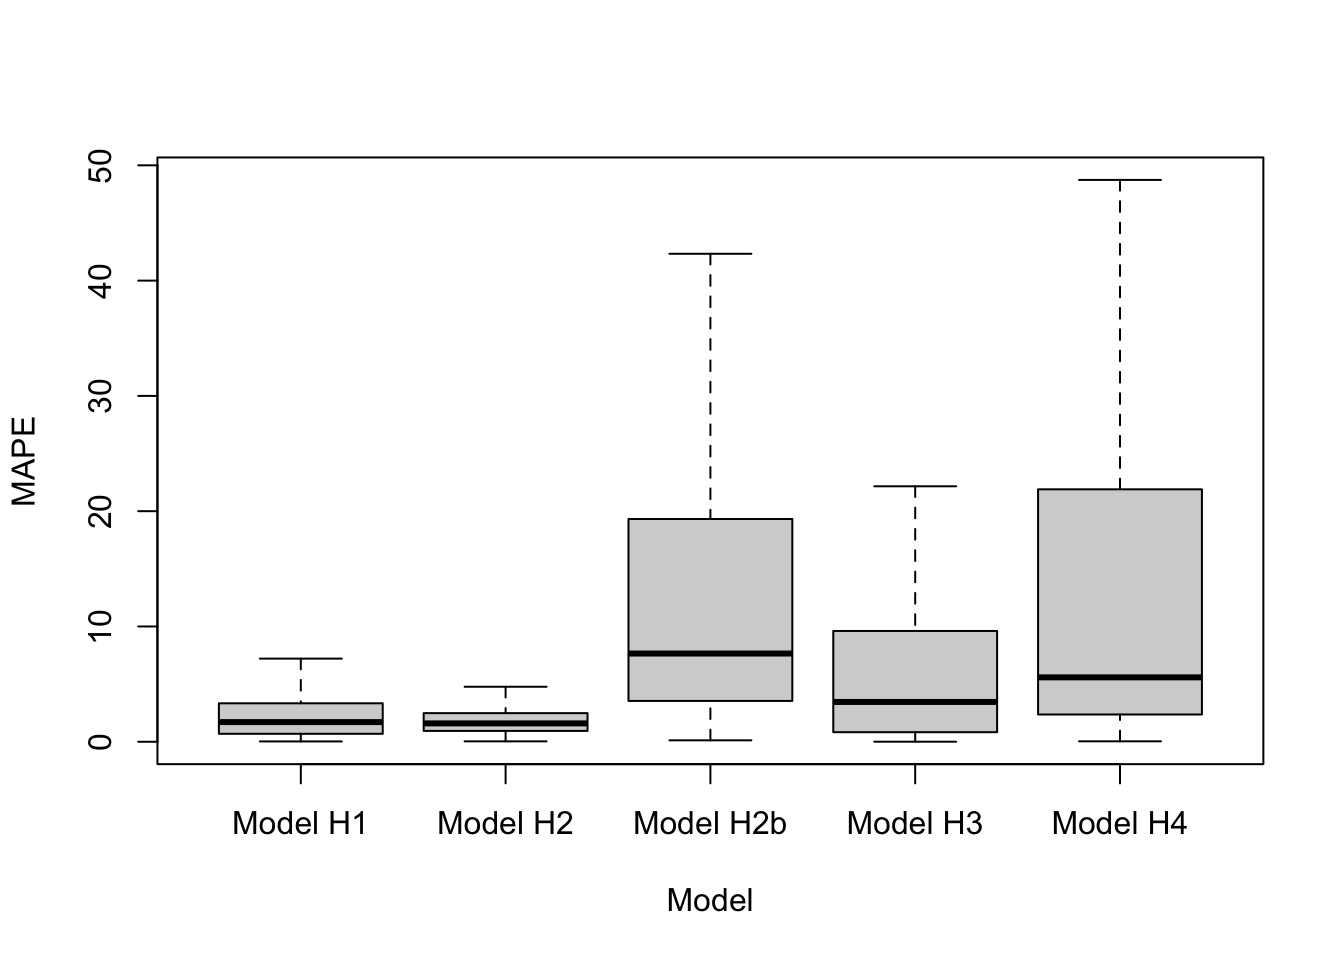 Boxplots of out-of-sample MAPE values across zones from five models.